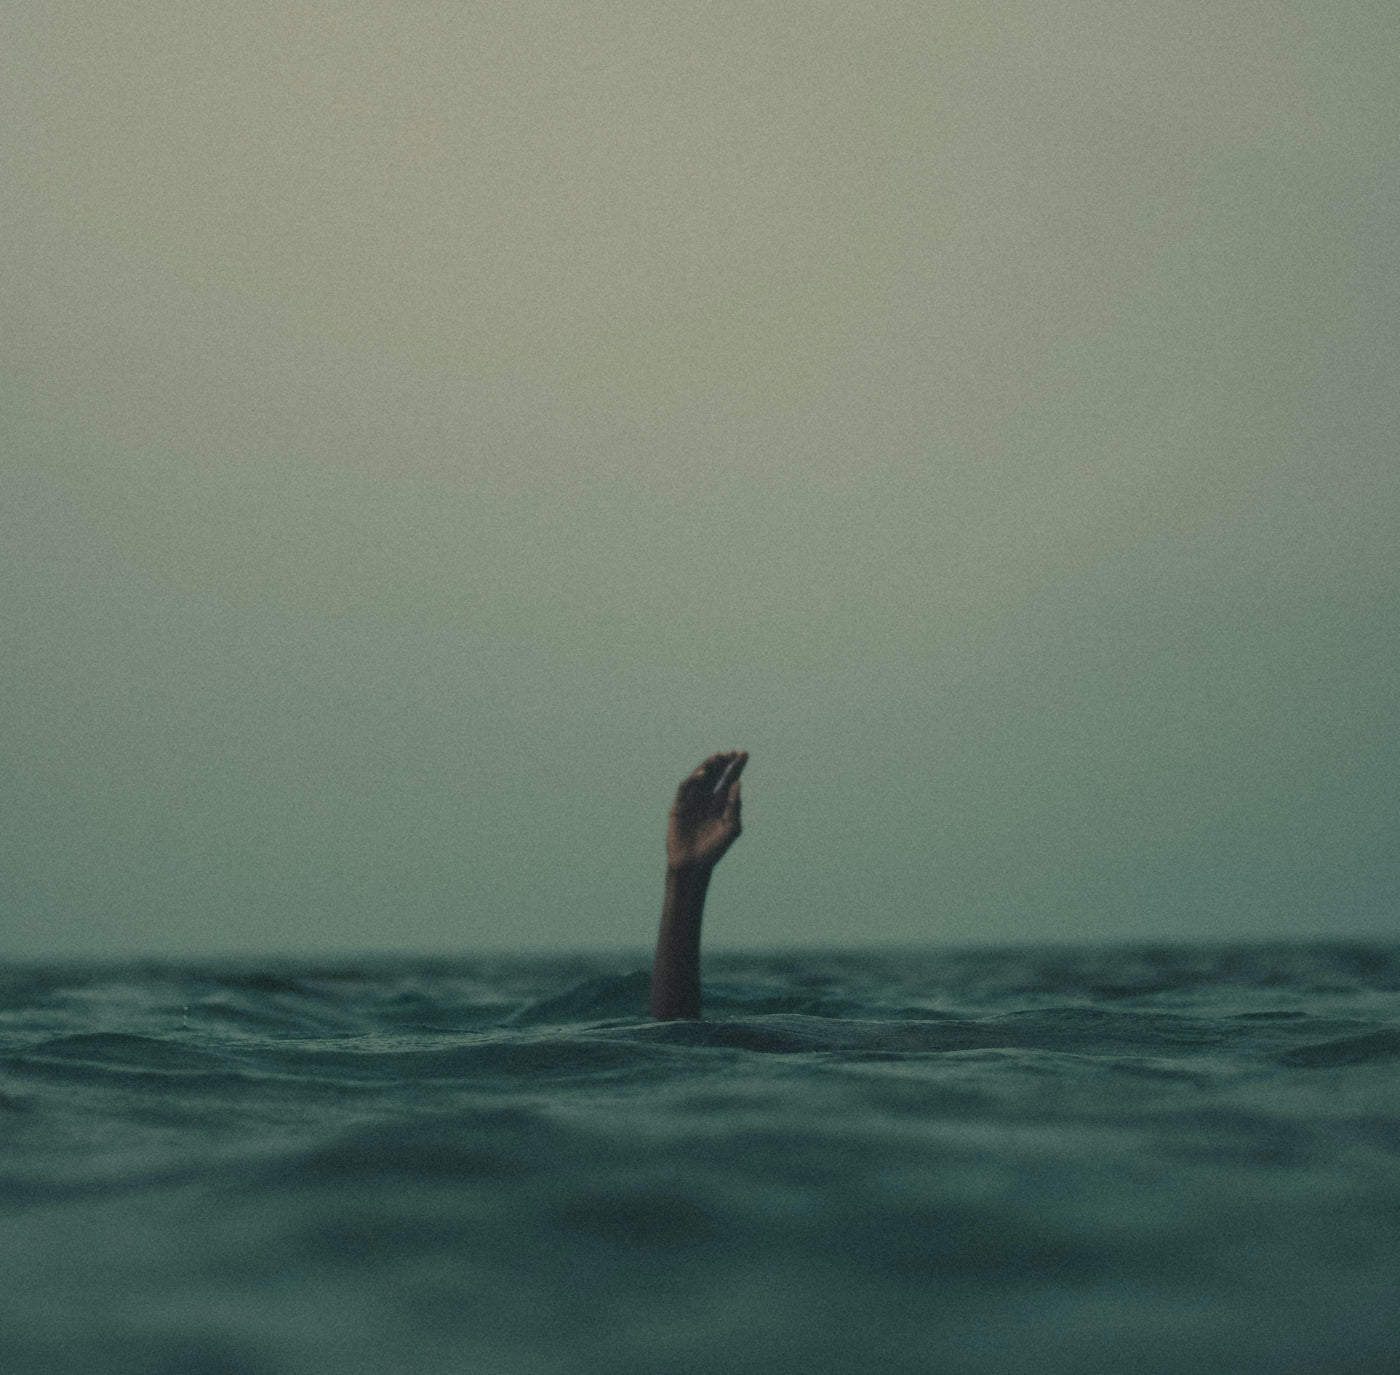 Hand in the ocean asking for help